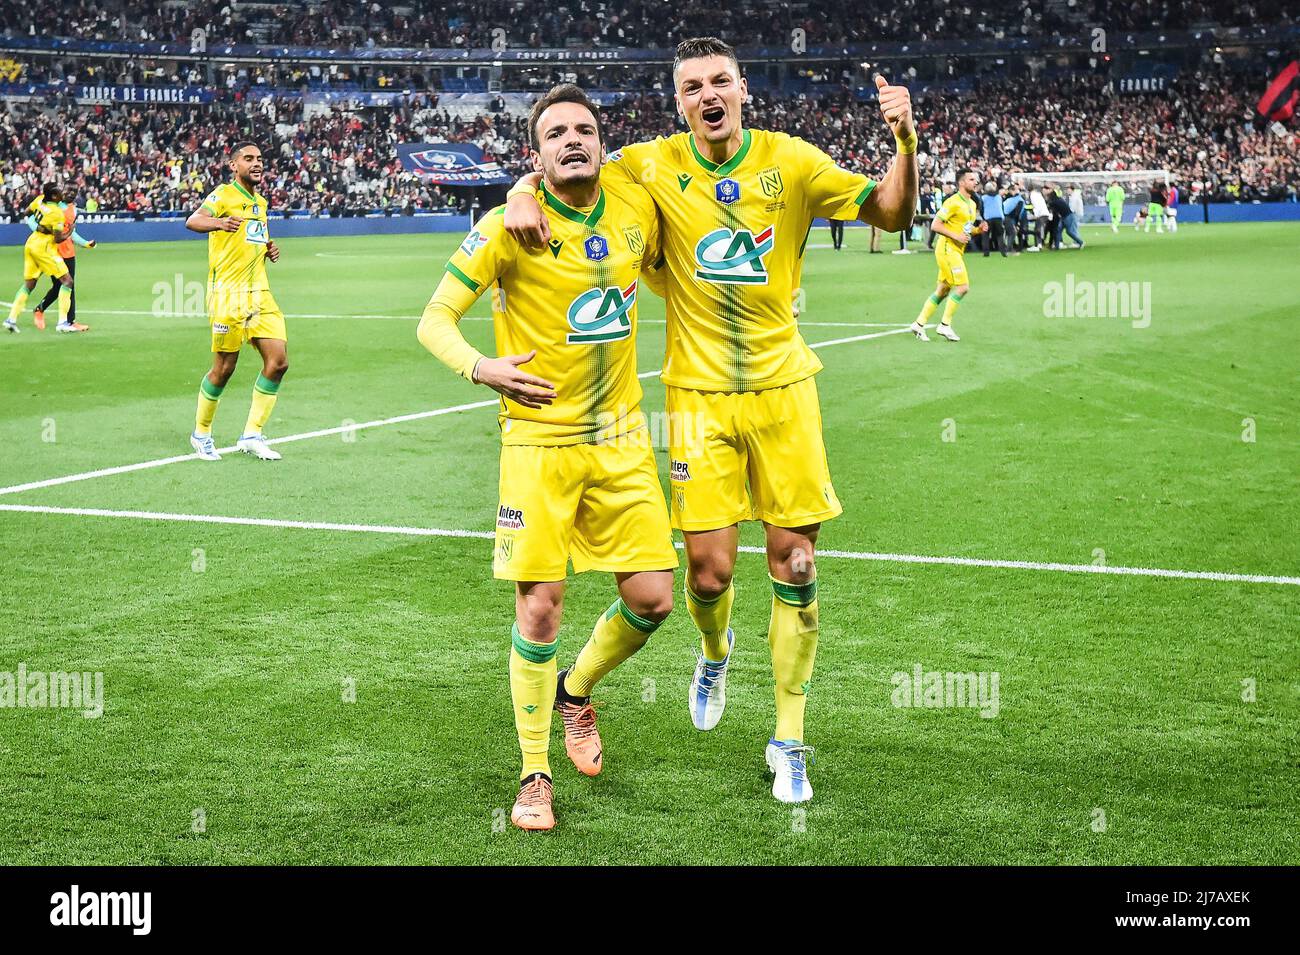 Pedro CHIRIVELLA of Nantes and Andrei GIROTTO of Nantes celebrate the  victory during the French Cup, Final football match between OGC Nice and FC  Nantes on May 7, 2022 at Stade de